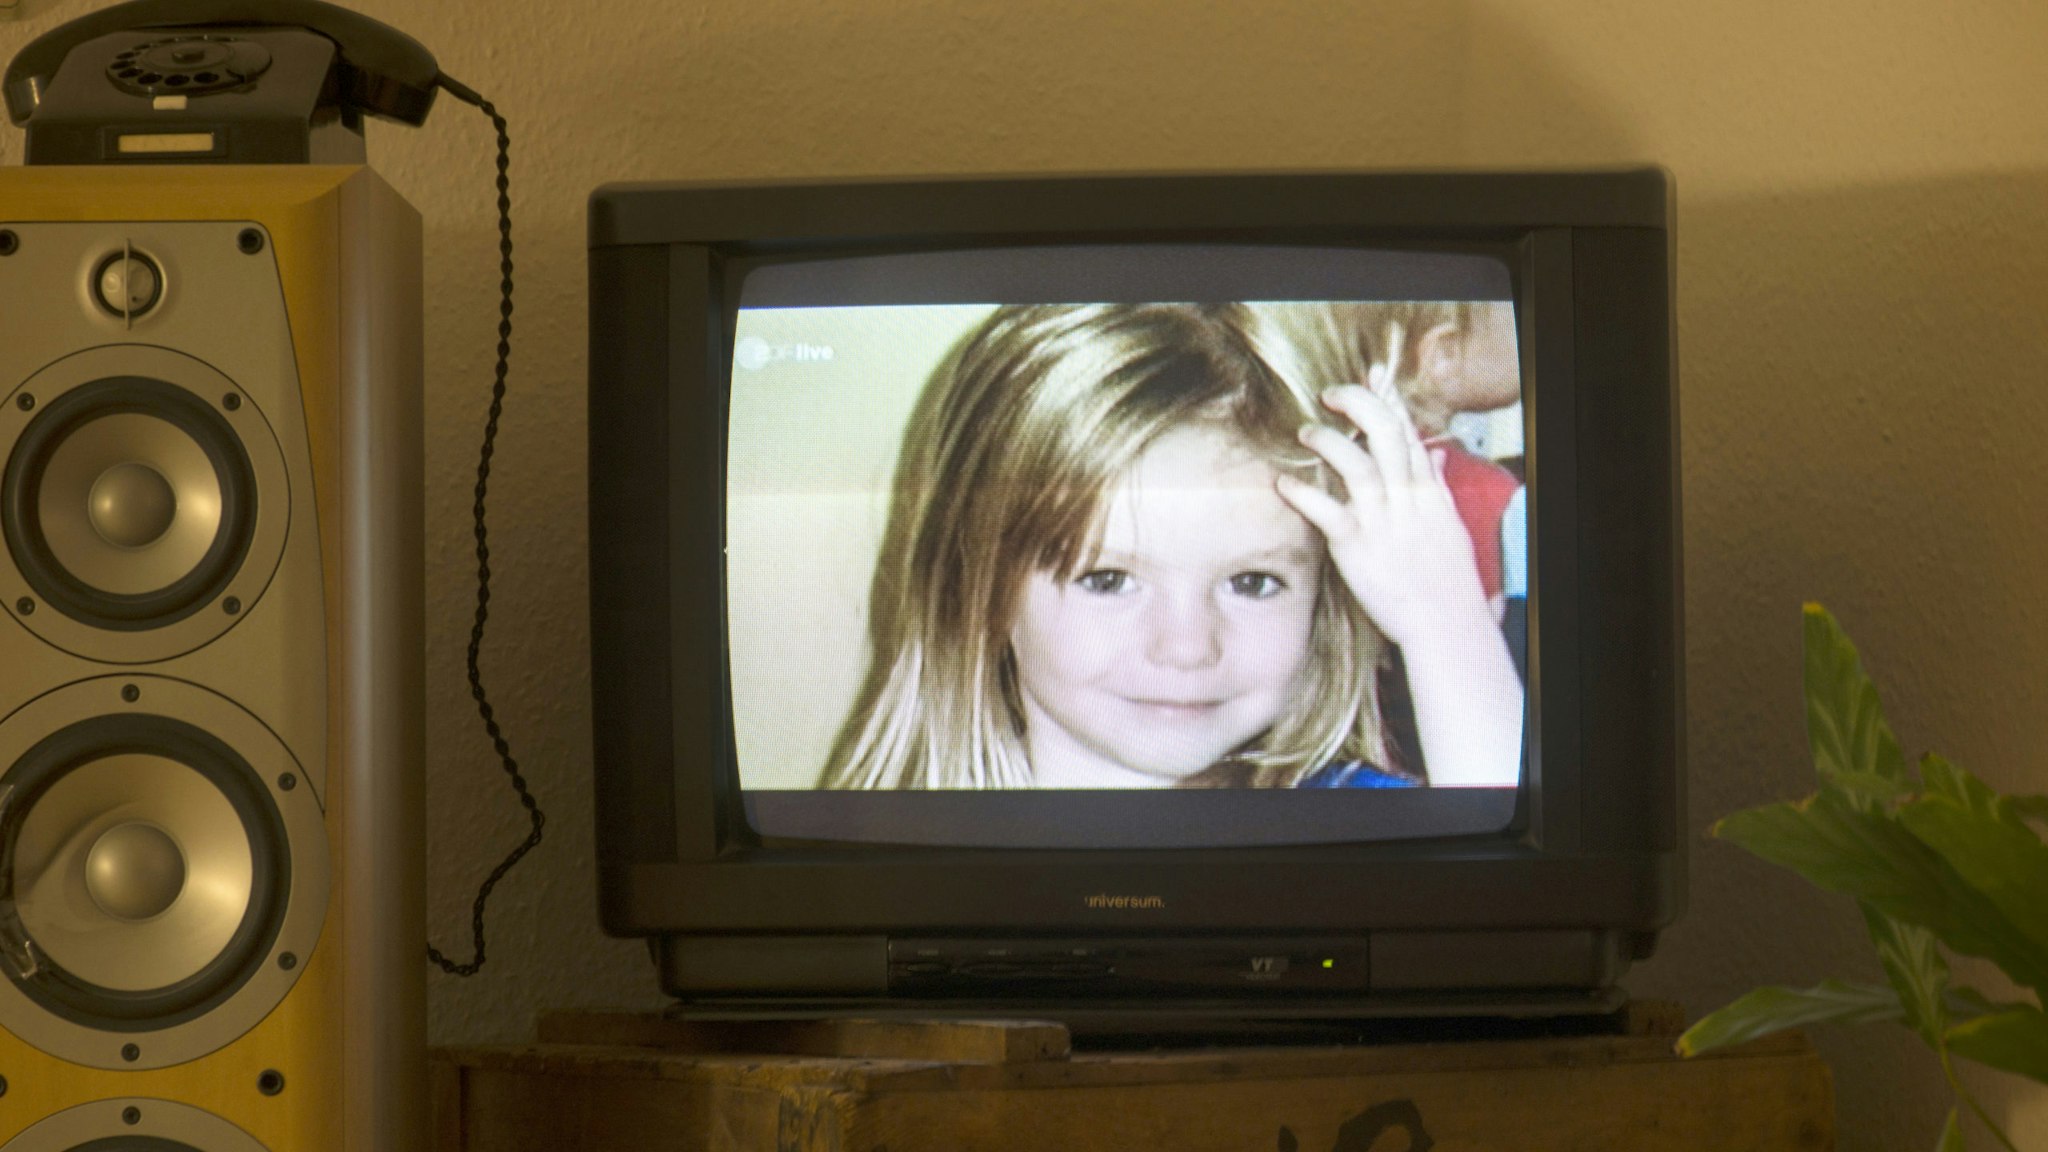 A photo of British girl Madeleine McCann aka Maddie is displayed on a TV screen at an appartmen in Berlin, on October 16, 2013 during the broadcast of German ZDF's "Aktenzeichen XY" programme. The German broadcaster received more than 500 phone calls and emails after airing the programme on the 2007 disappearance of British toddler Madeleine McCann in Portugal, the station said on October 16, 2013. The appeal, based on two years of work raking over the case by Scotland Yard's officers, was first broadcast in Great Britain on the BBC's "Crimewatch" programme. AFP PHOTO / JOHANNES EISELE (Photo credit should read JOHANNES EISELE/AFP via Getty Images)